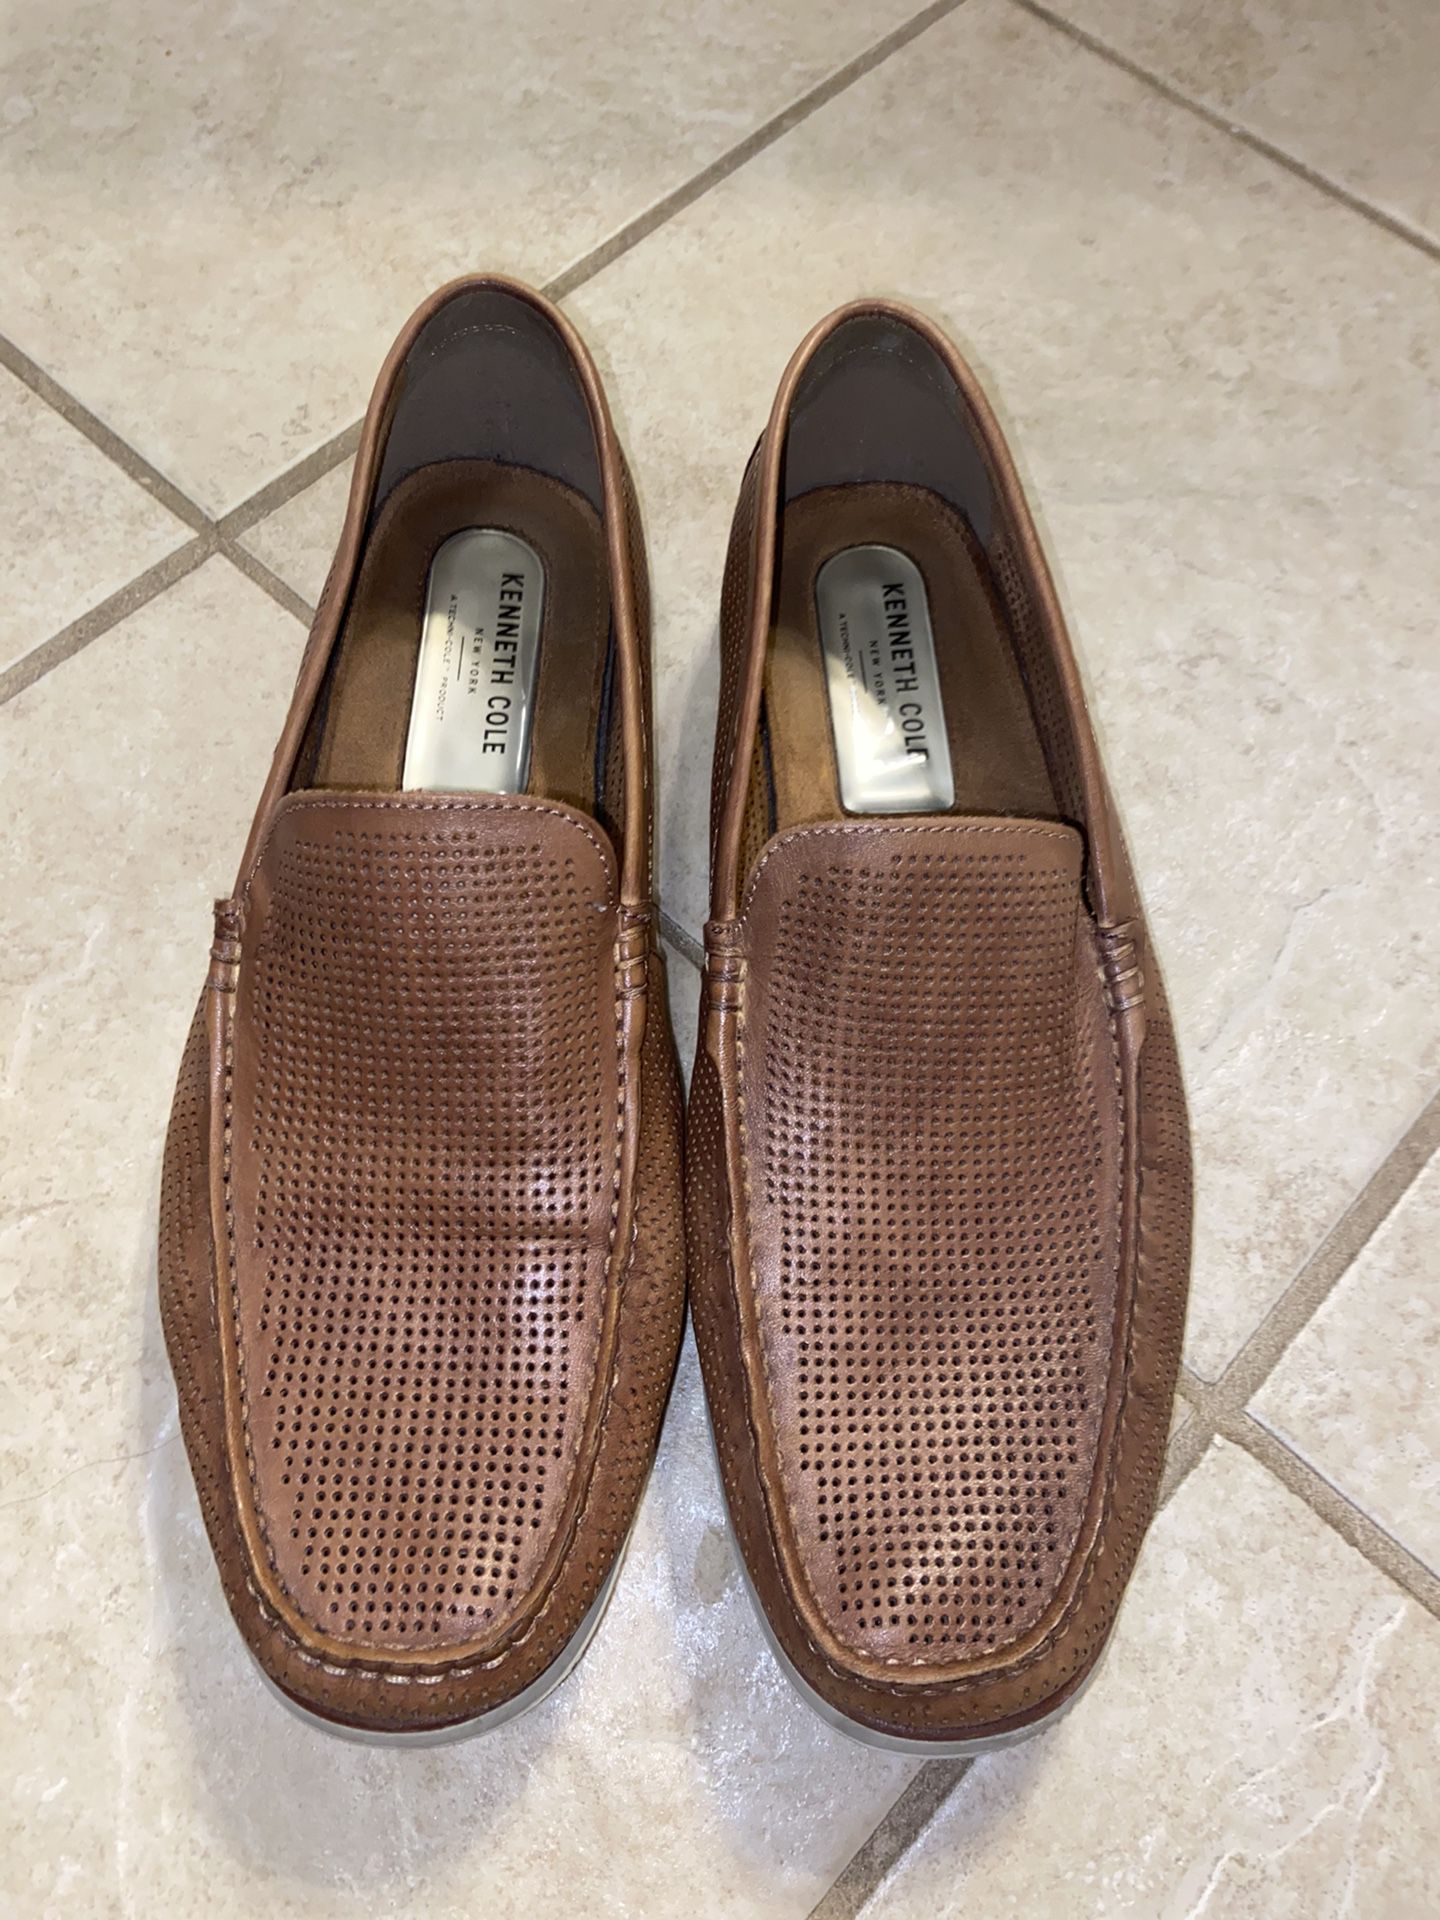 Kenneth Cole shoes 10.5